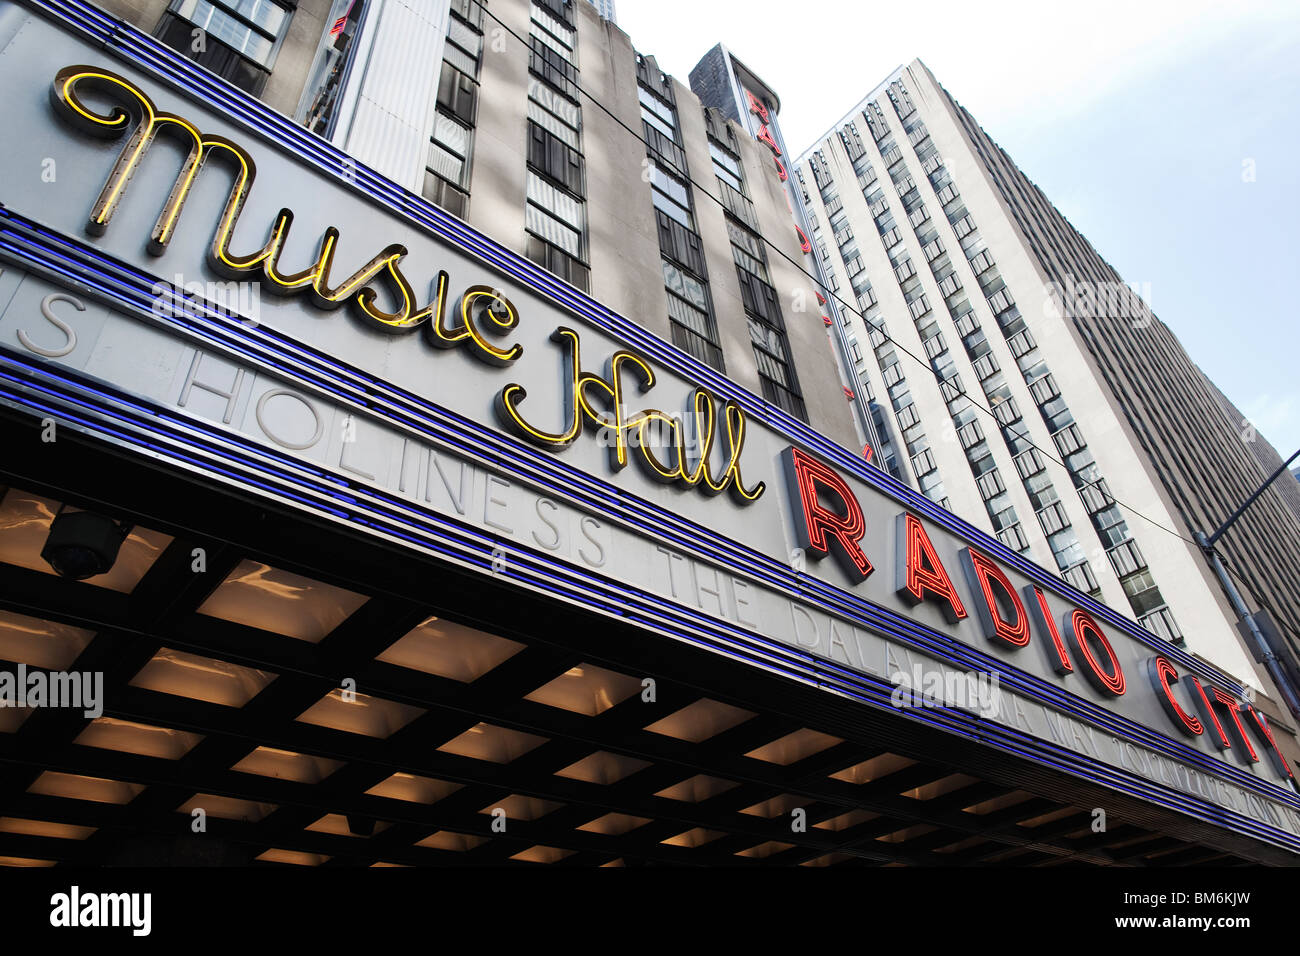 The XIV Dalai Lama of Tibet appeared at Radio City Music Hall in New York for a series of Buddhist spiritual teachings. Stock Photo